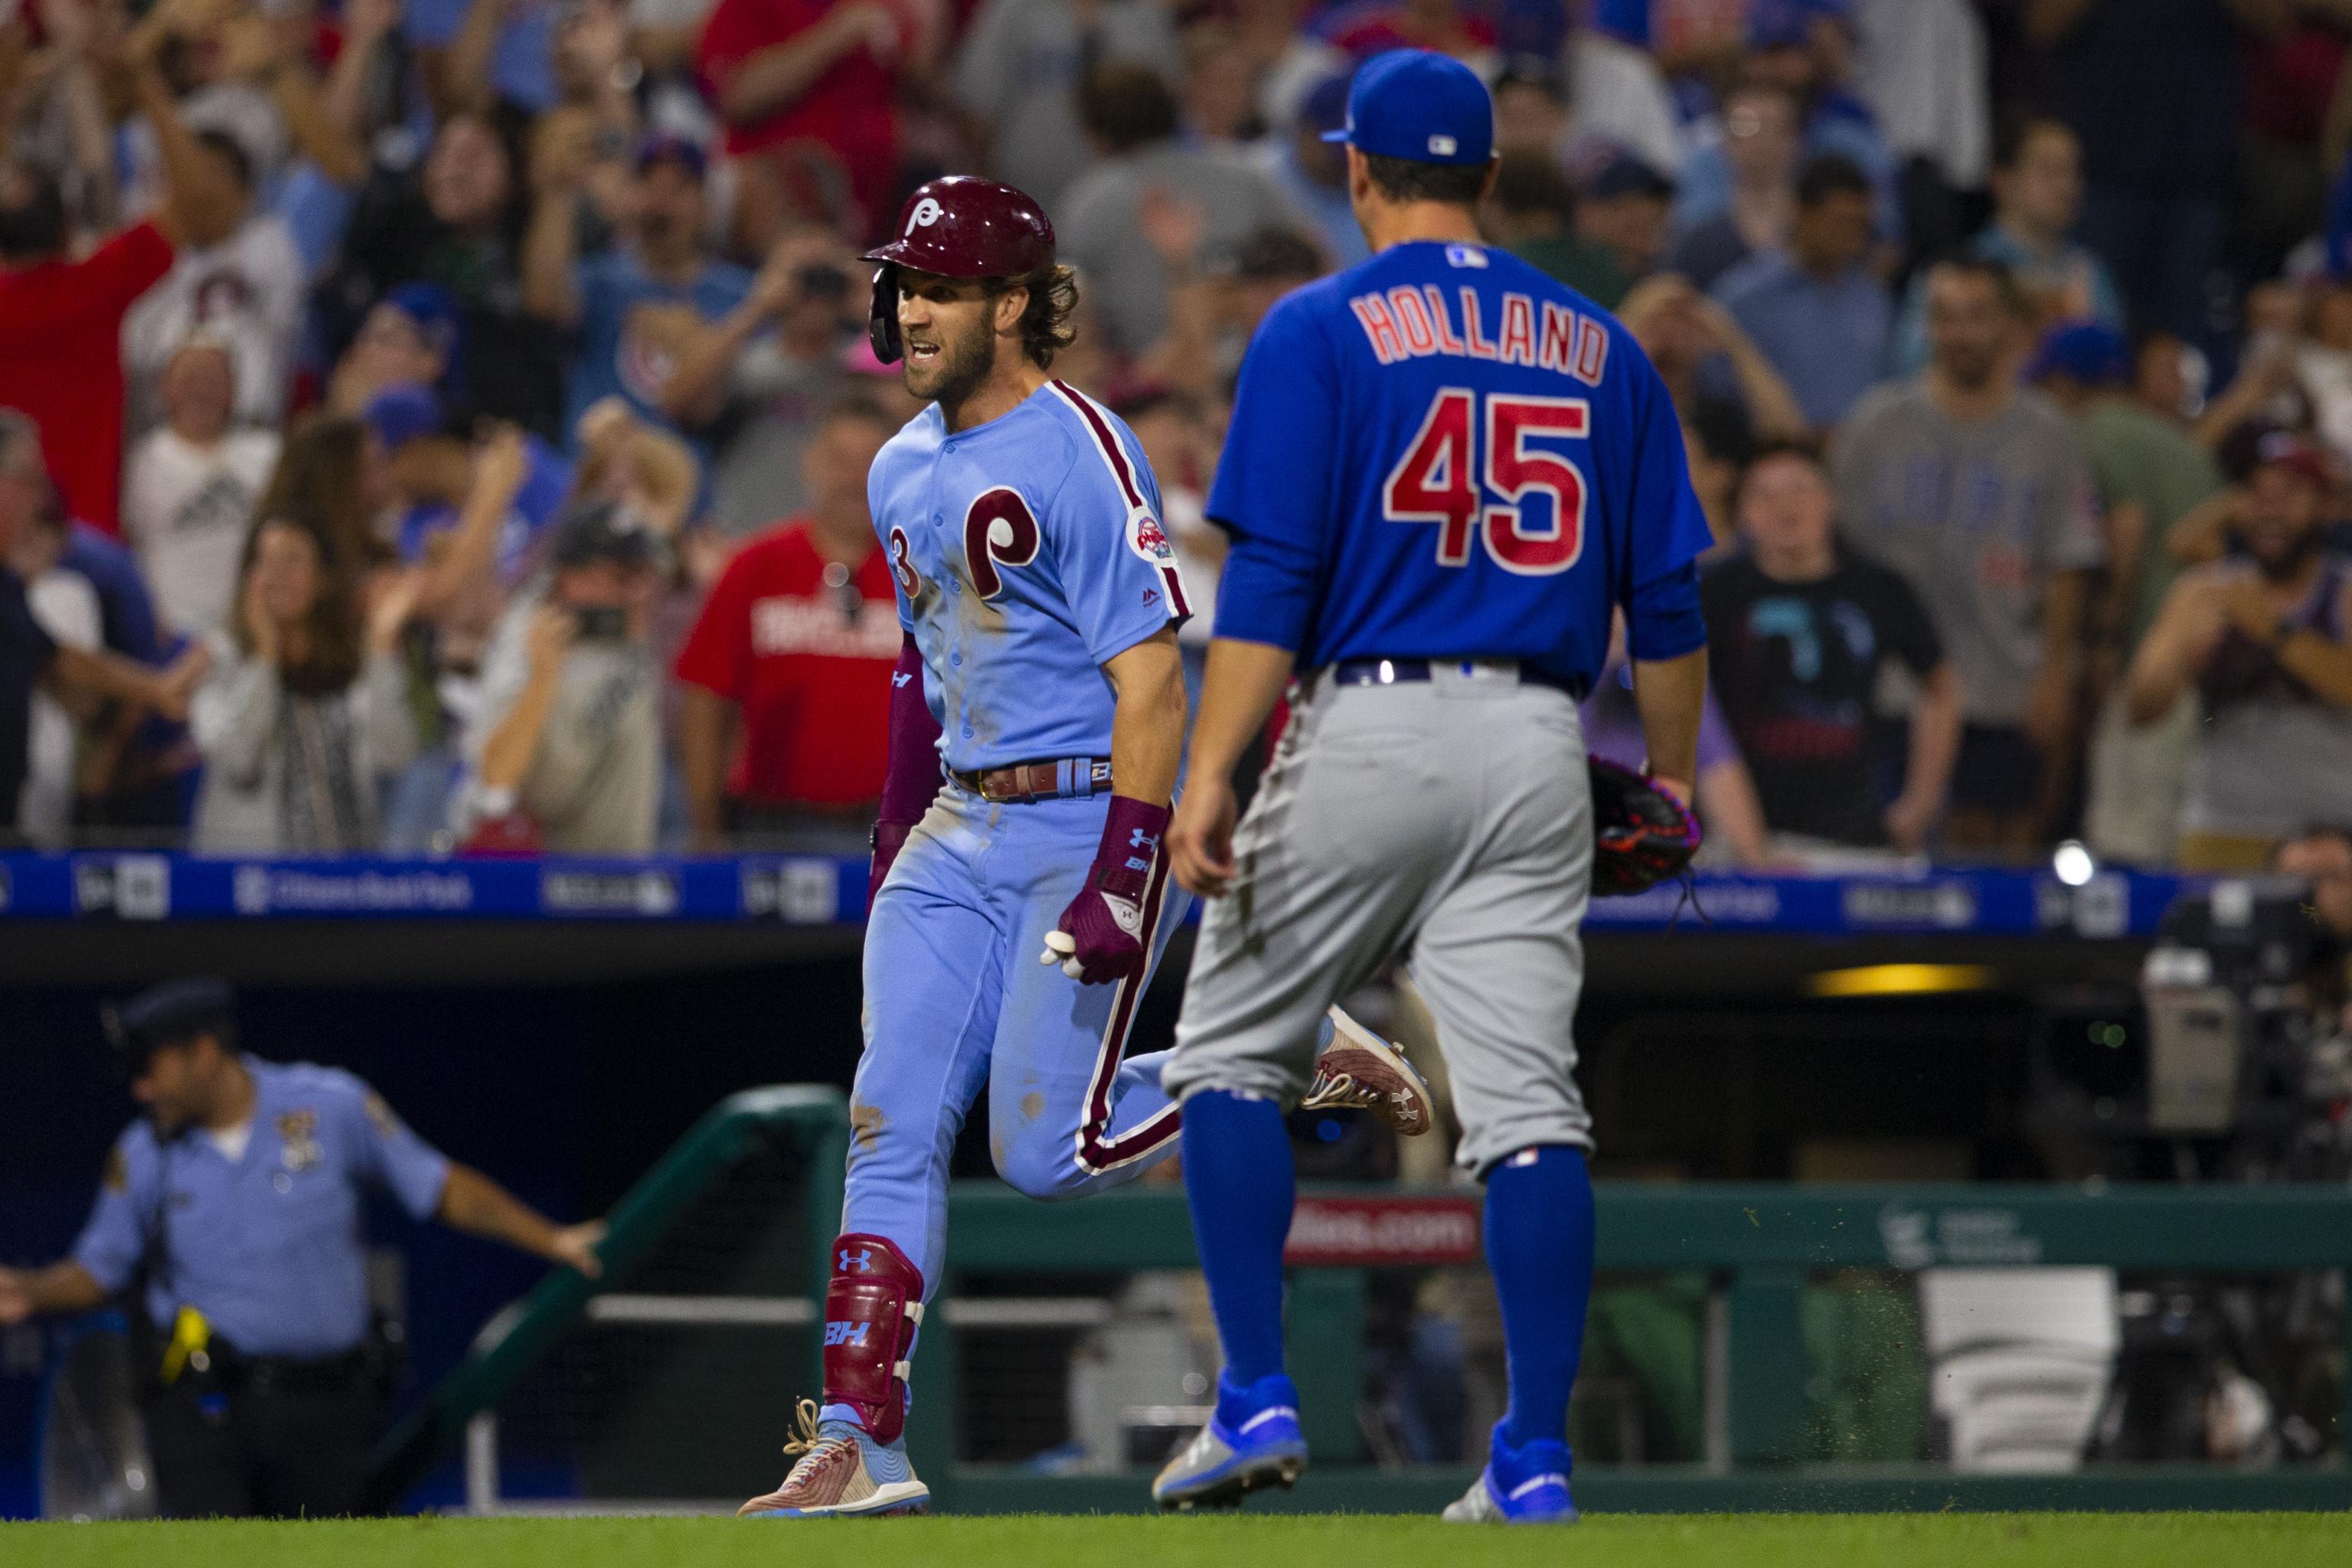 Reaction: Bryce Harper Hits WALK OFF GRAND SLAM to Sweep the Cub